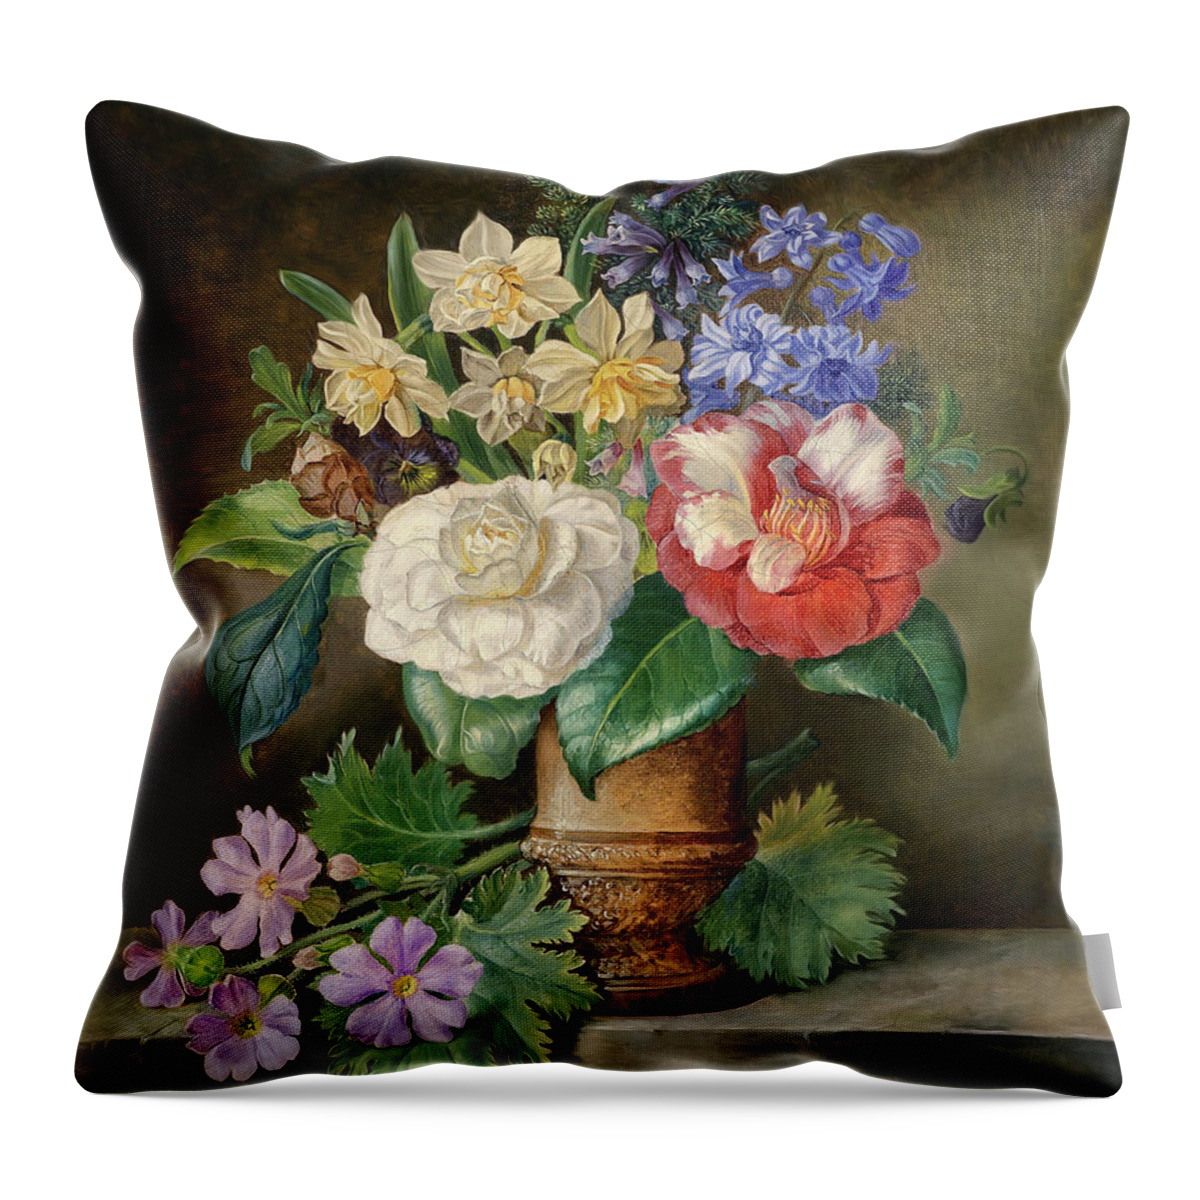 Still Life Of Flowers With Daffodils Throw Pillow featuring the photograph Still Life of Flowers with Daffodils by Franz Xaver Andreas Petter by Carlos Diaz